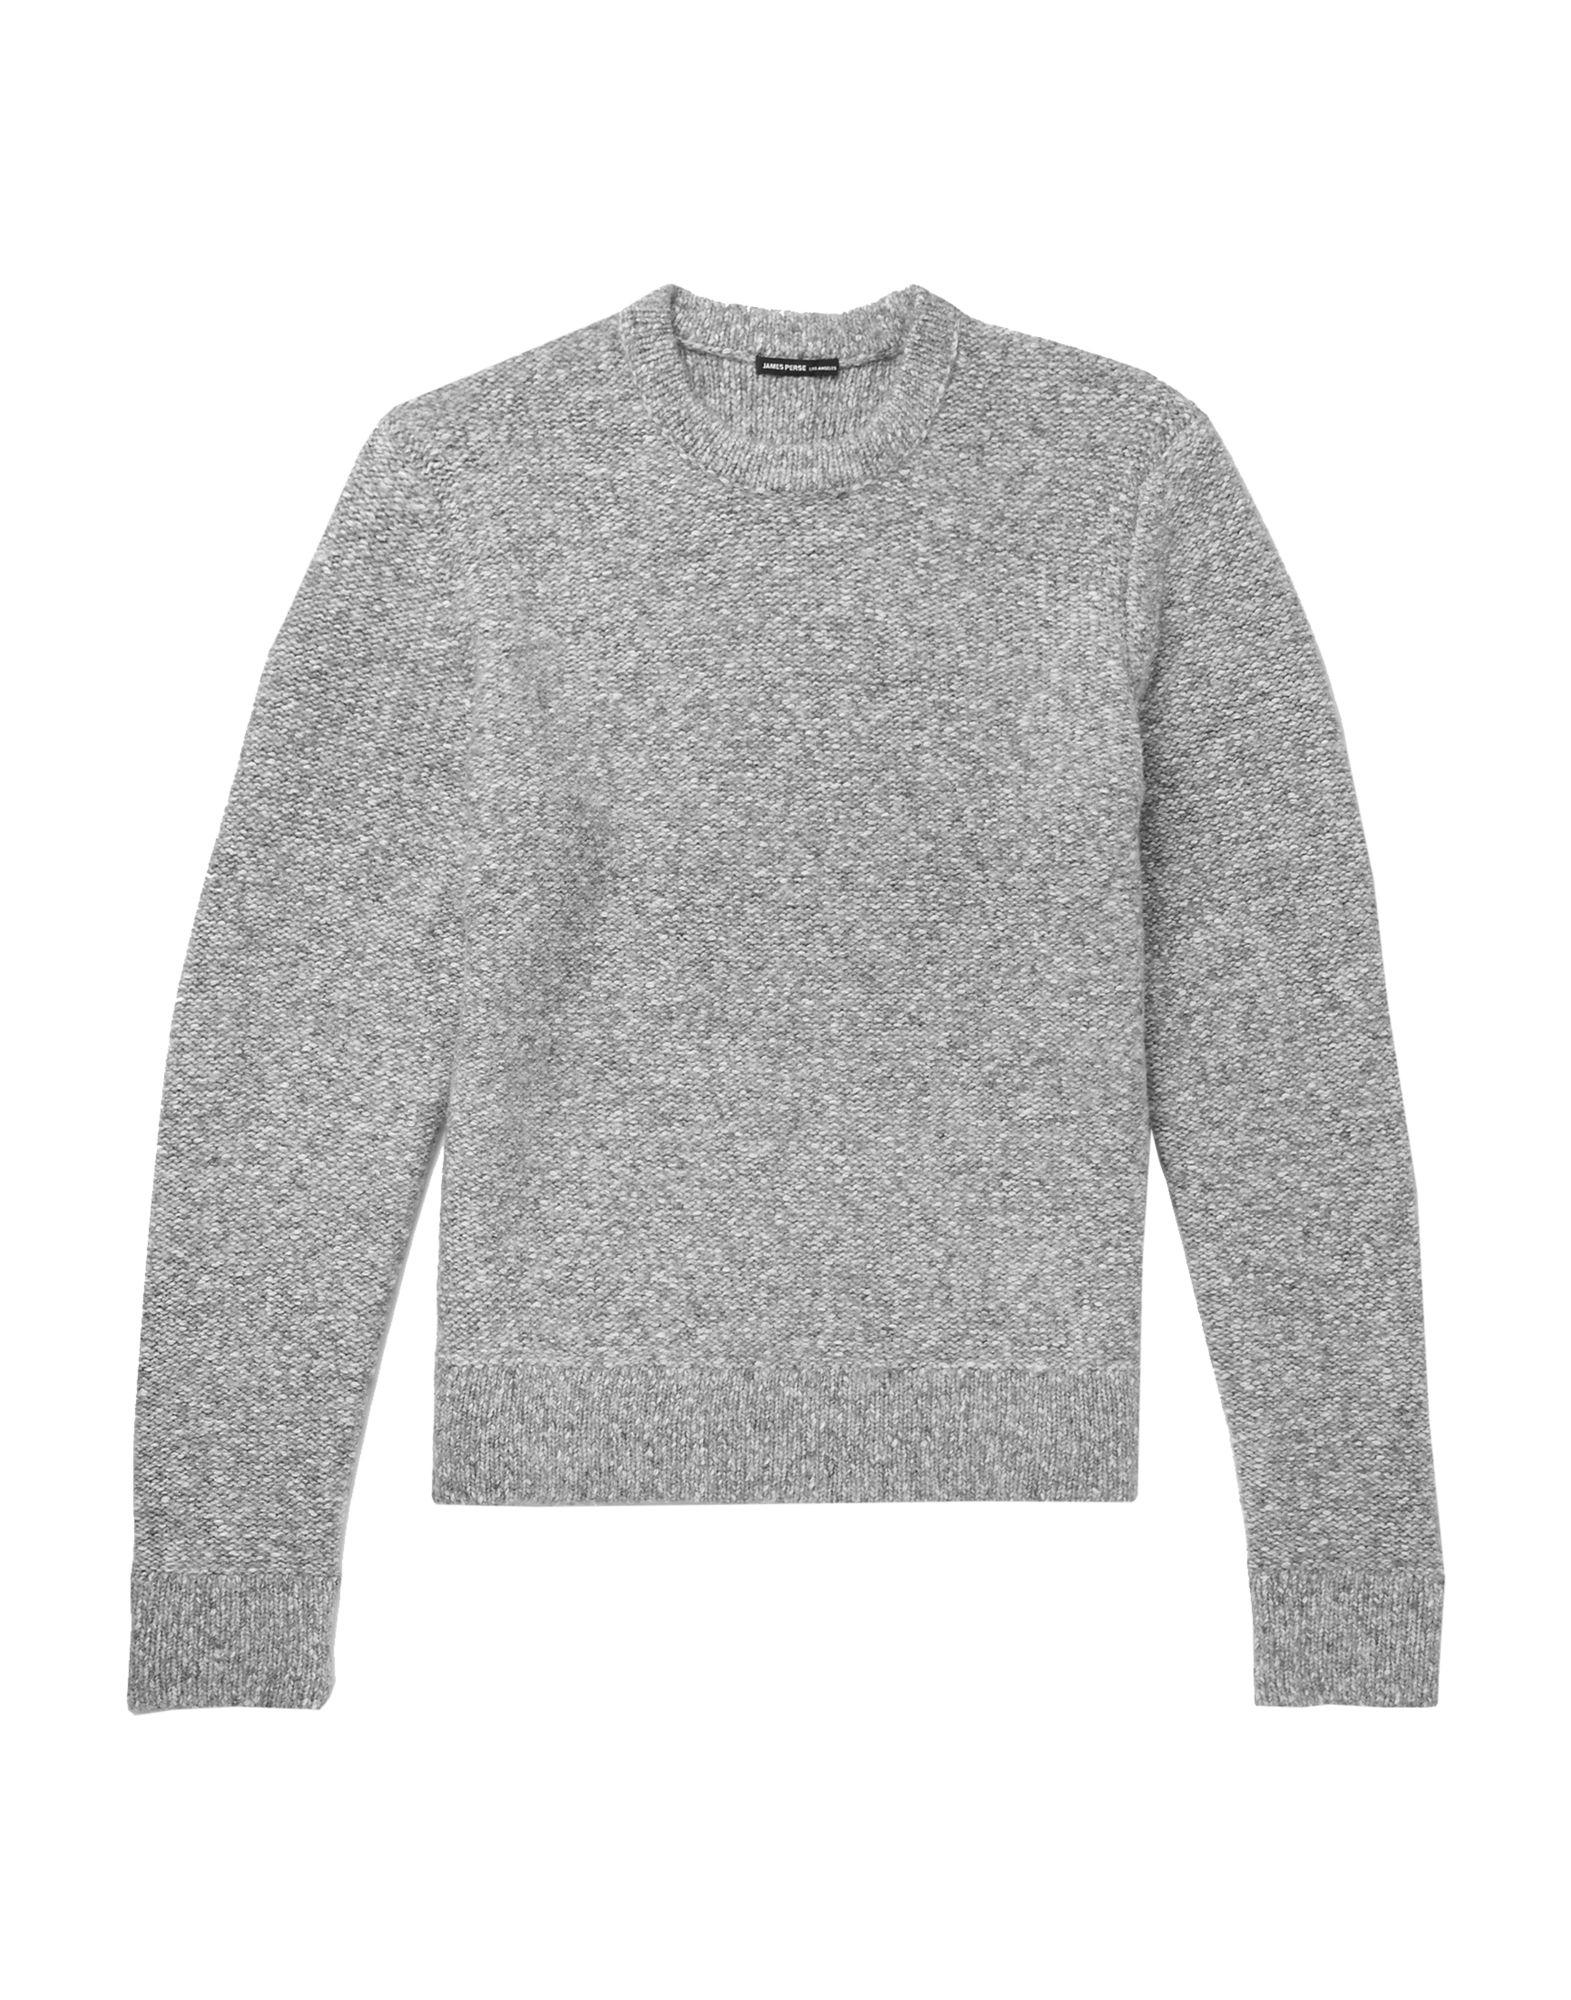 James Perse Cotton Sweater in Light Grey (Gray) for Men - Save 21% - Lyst